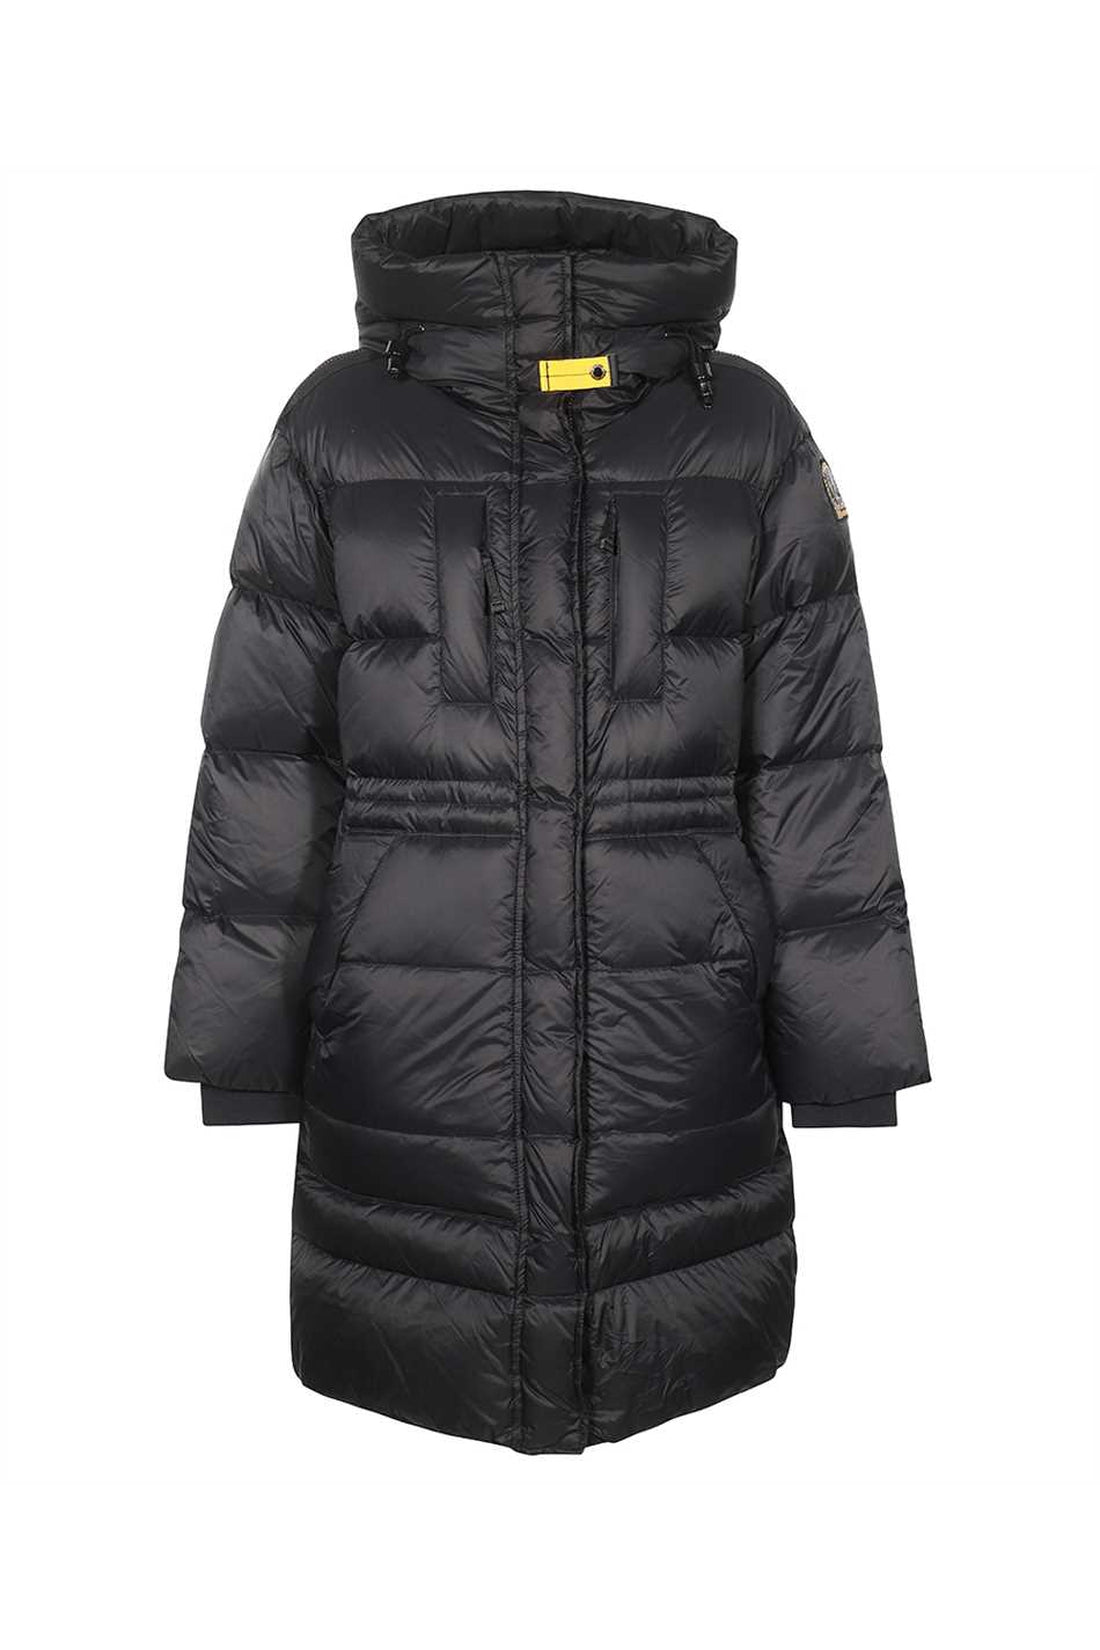 Parajumpers-OUTLET-SALE-Eira long hooded down jacket-ARCHIVIST